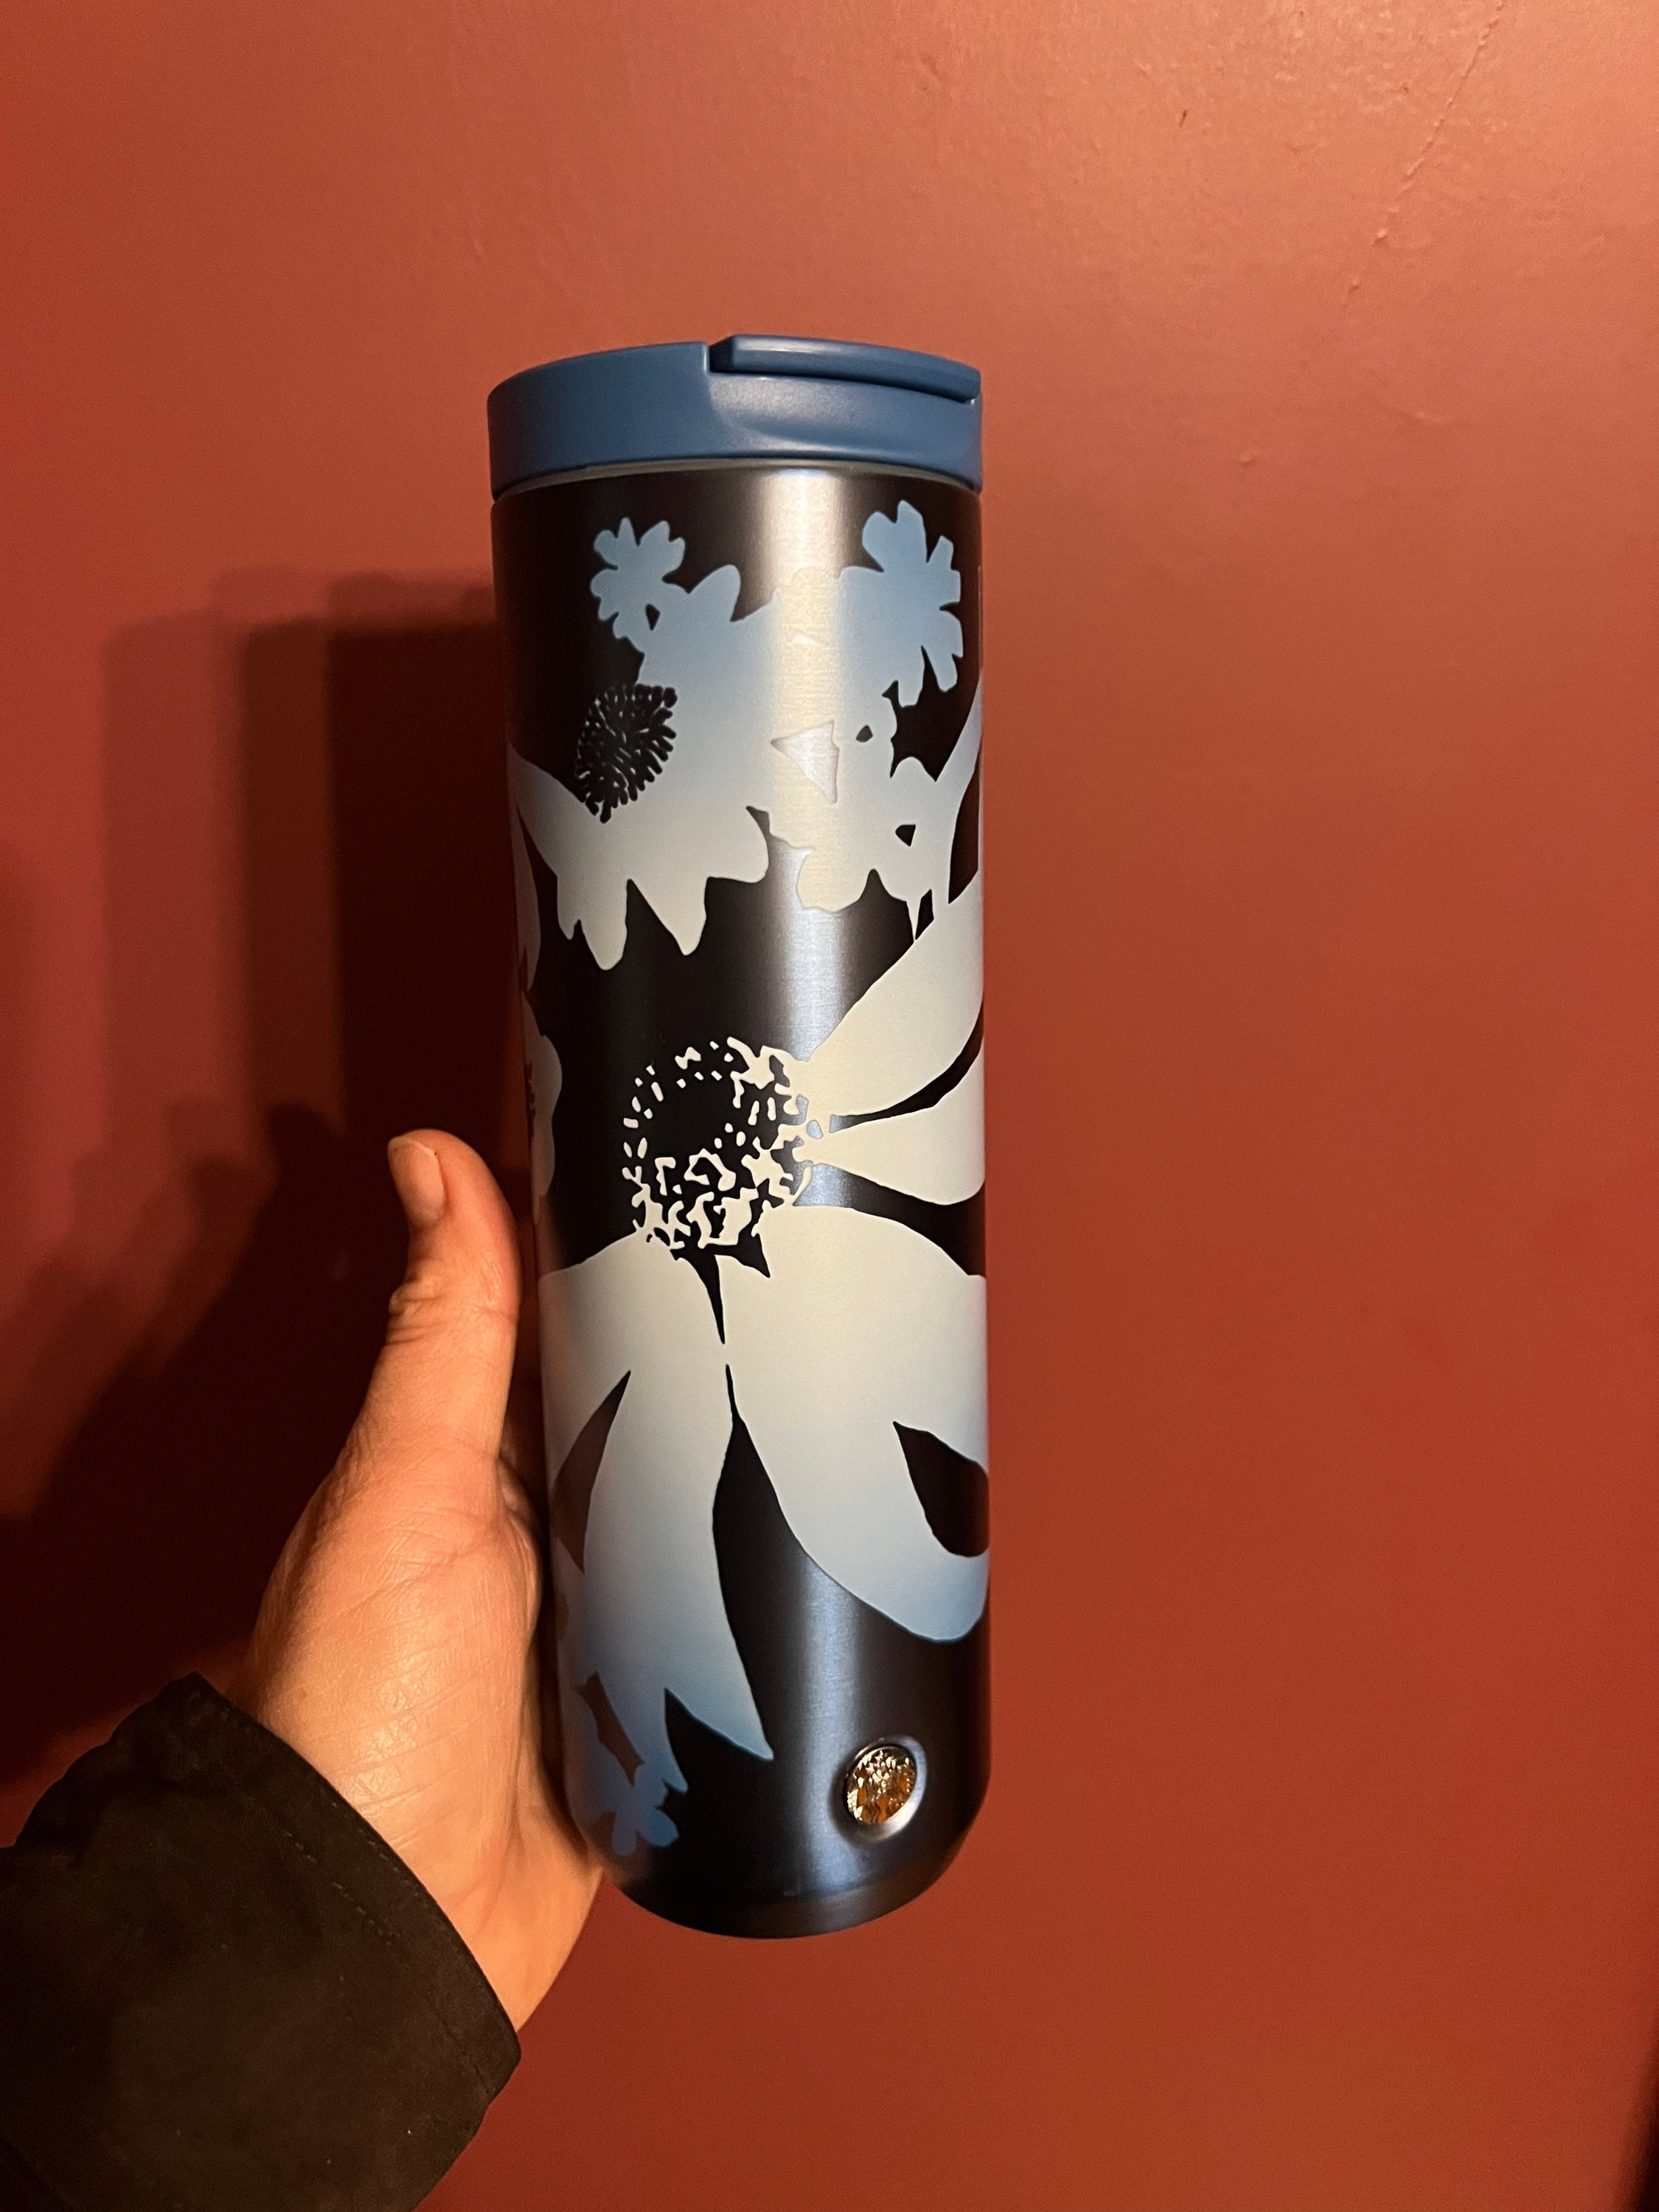 Starbucks Blue Floral and Pinecone Vacuum Insulated Tumbler 16 oz